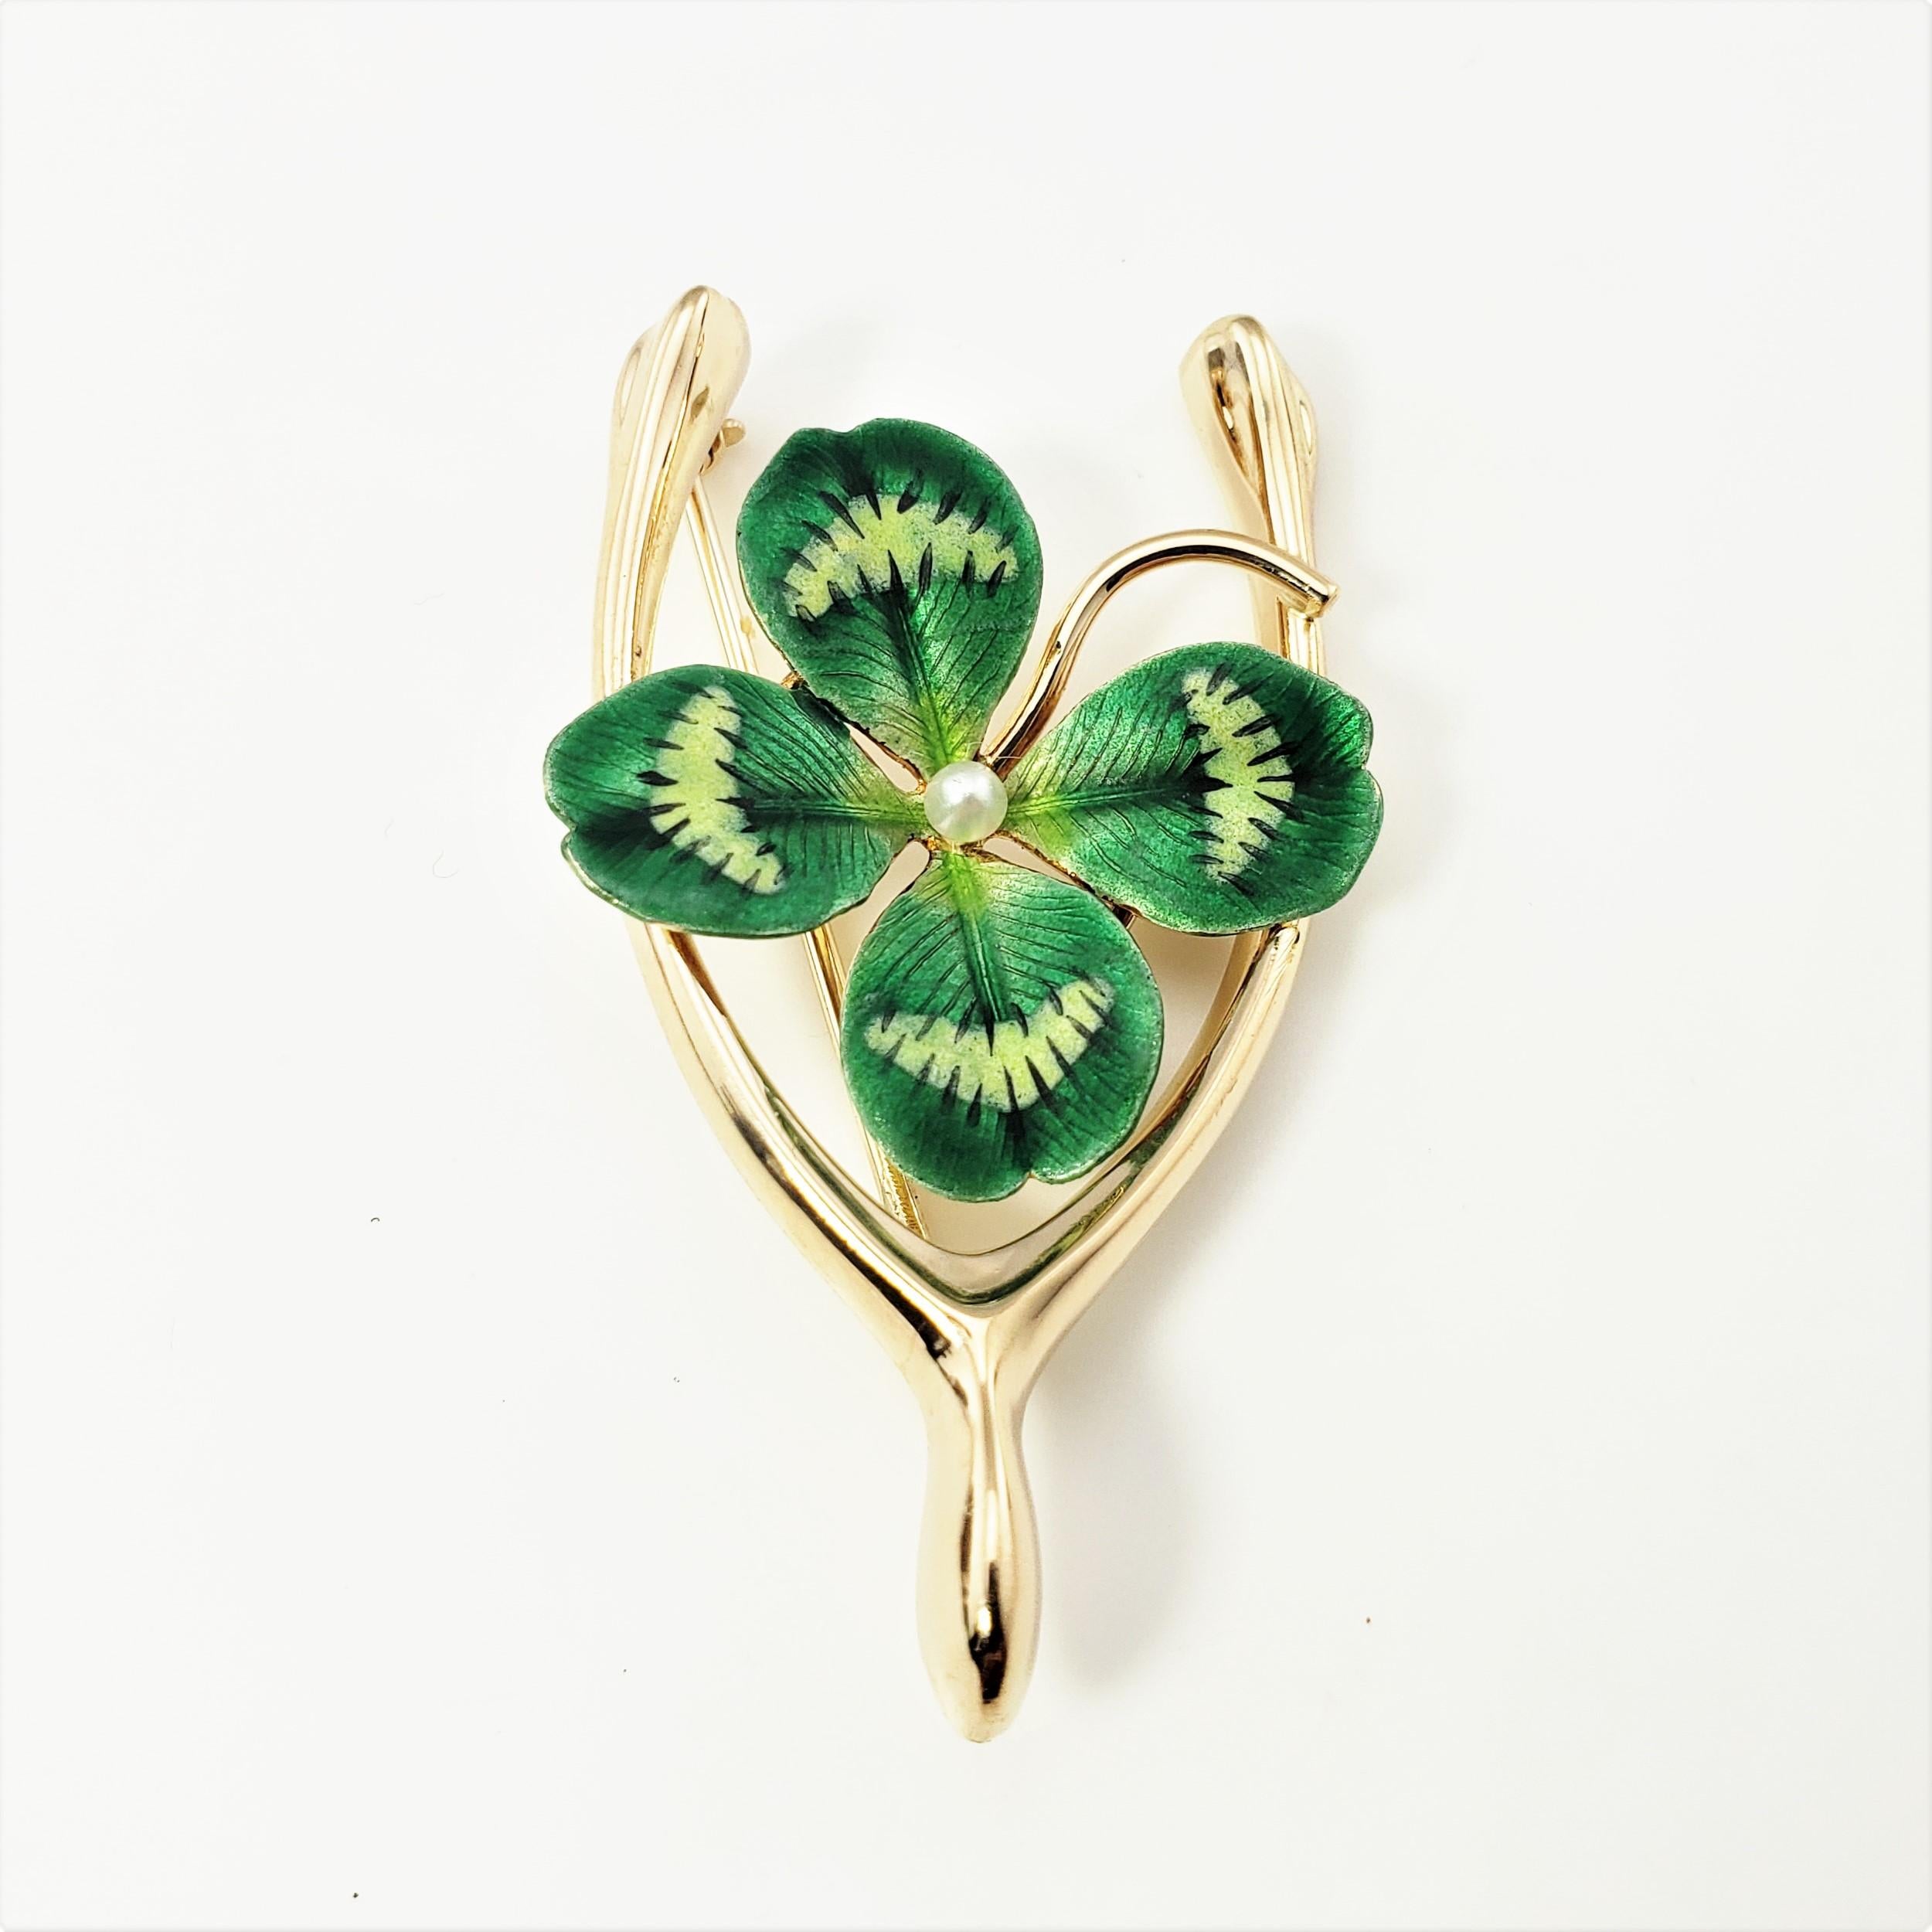 14 Karat Yellow Gold and Enamel Shamrock Wishbone Brooch/Pin-

The ultimate good luck charm!

This lovely brooch feature a wishbone and green enameled shamrock accented with a seed pearl in its center.  Crafted in classic 14K yellow gold.

Size:  43